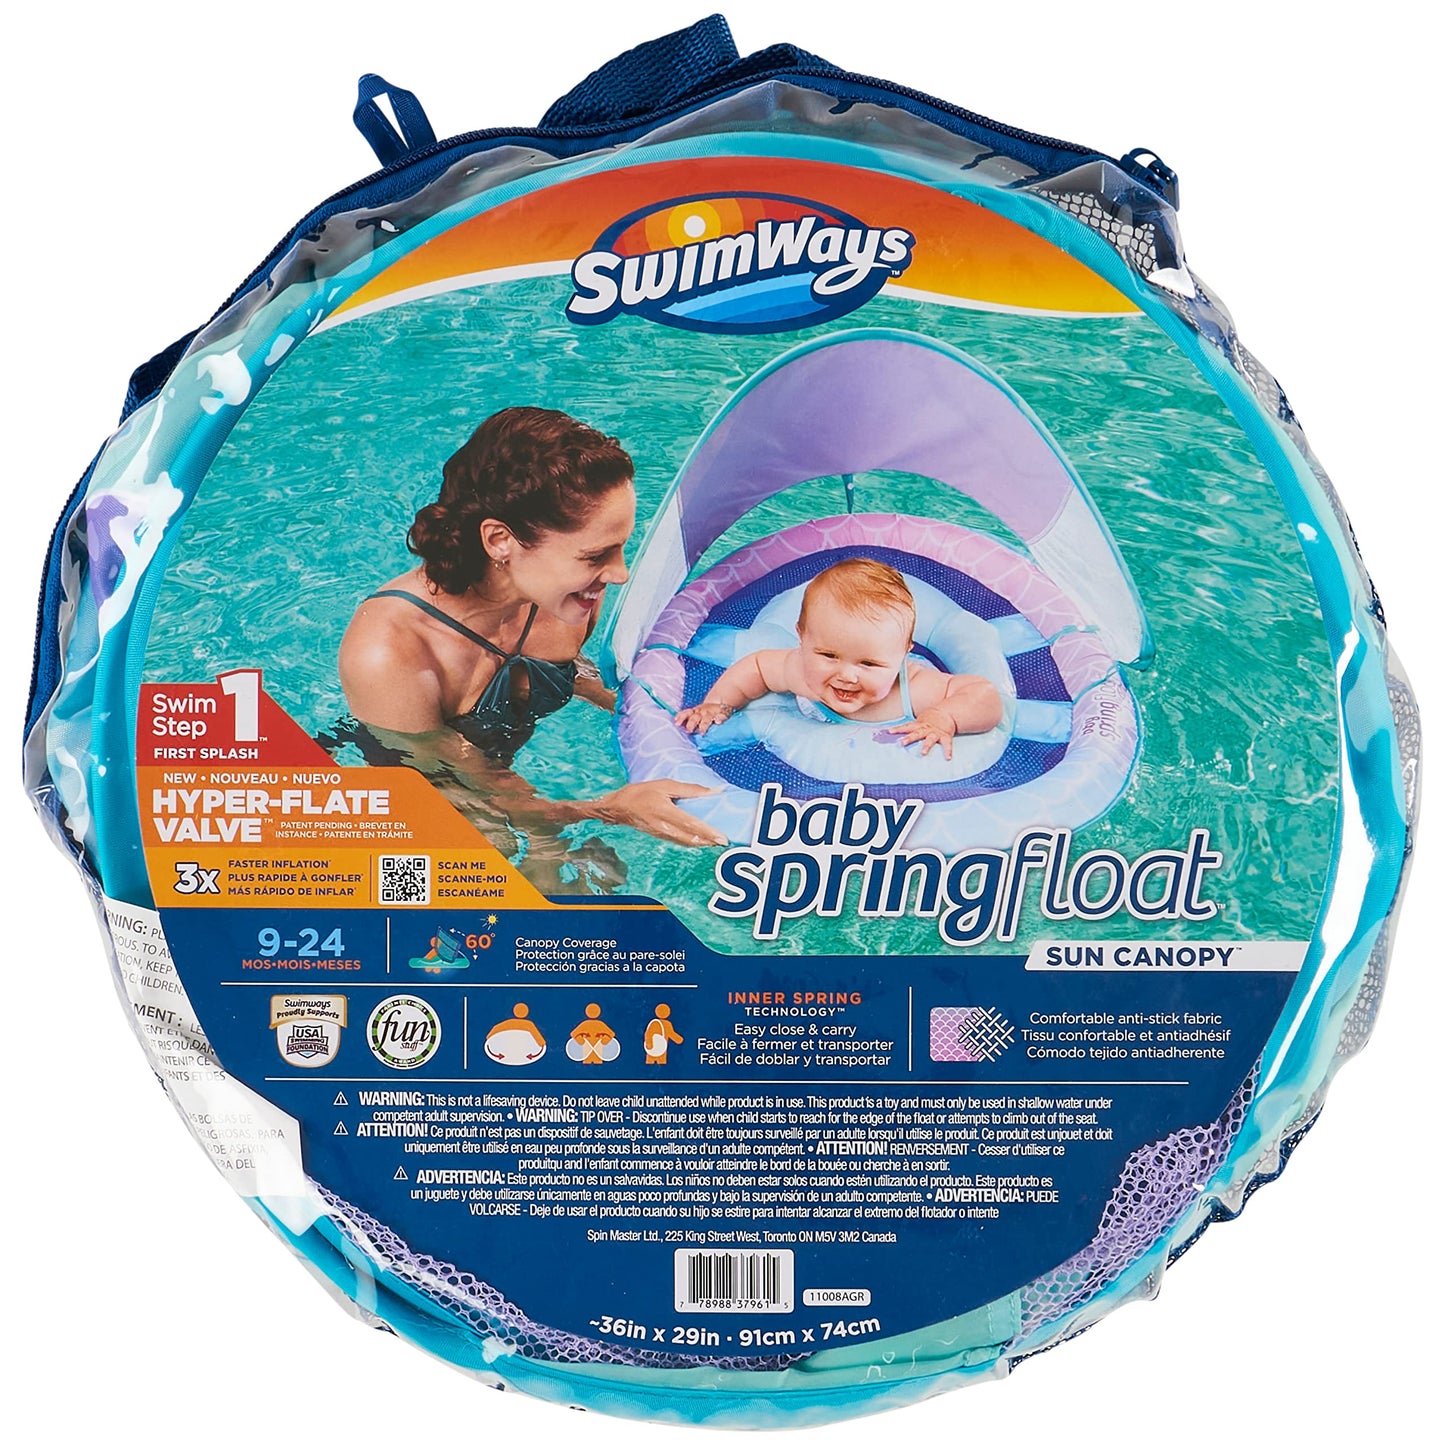 Swimways Sun Canopy Inflatable Infant Spring Float for Infants 9-24 Months, Mermaid Design